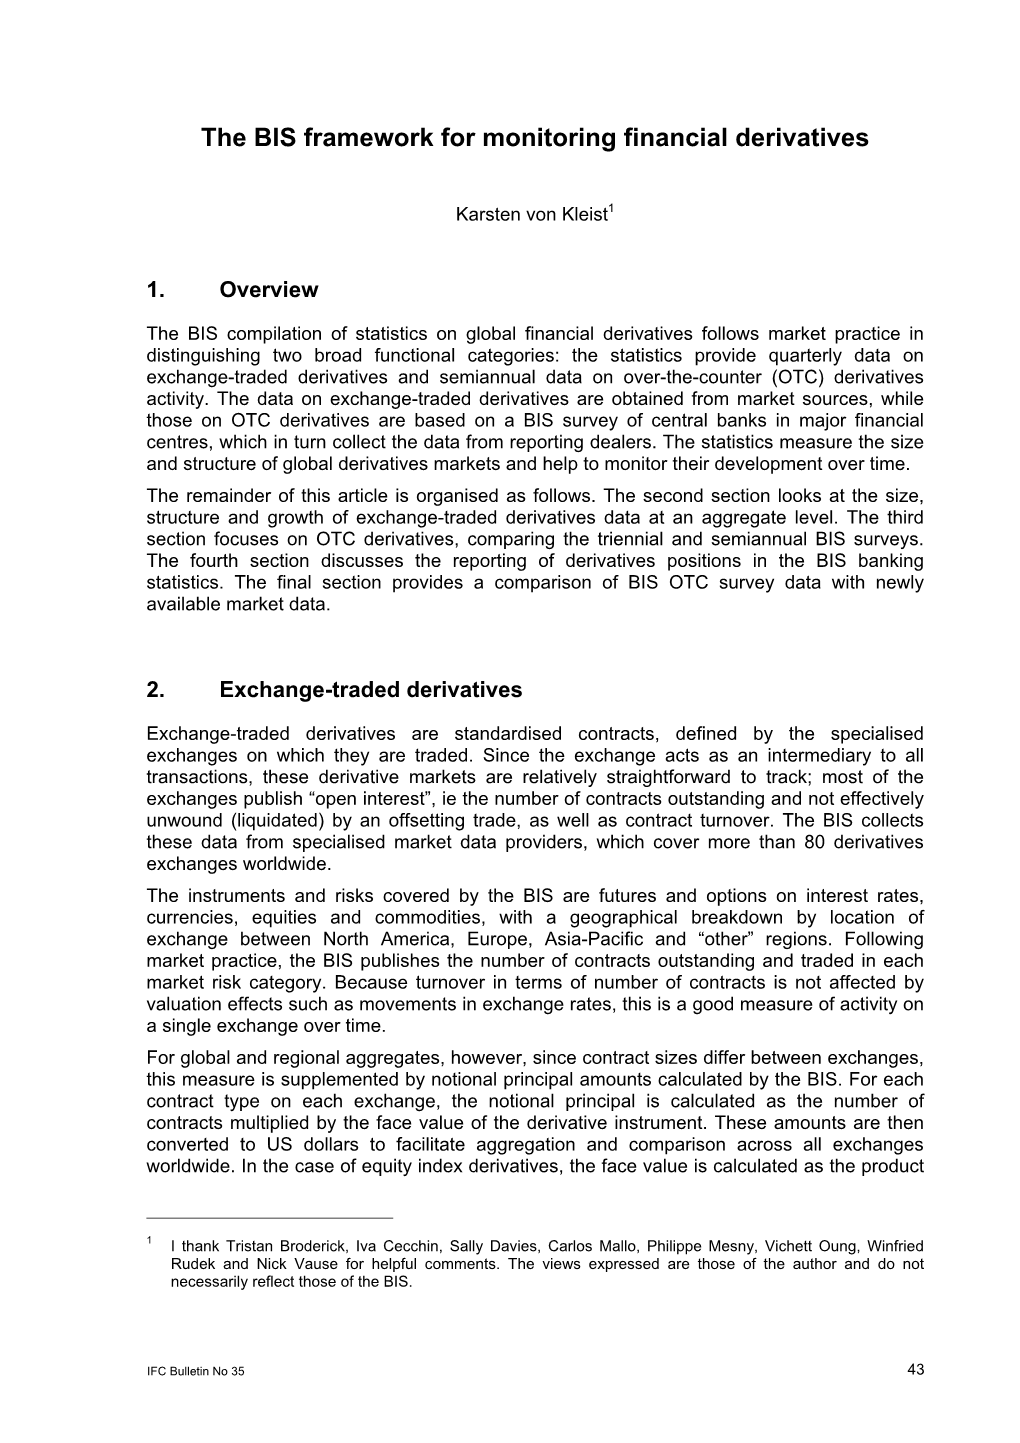 The BIS Framework for Monitoring Financial Derivatives